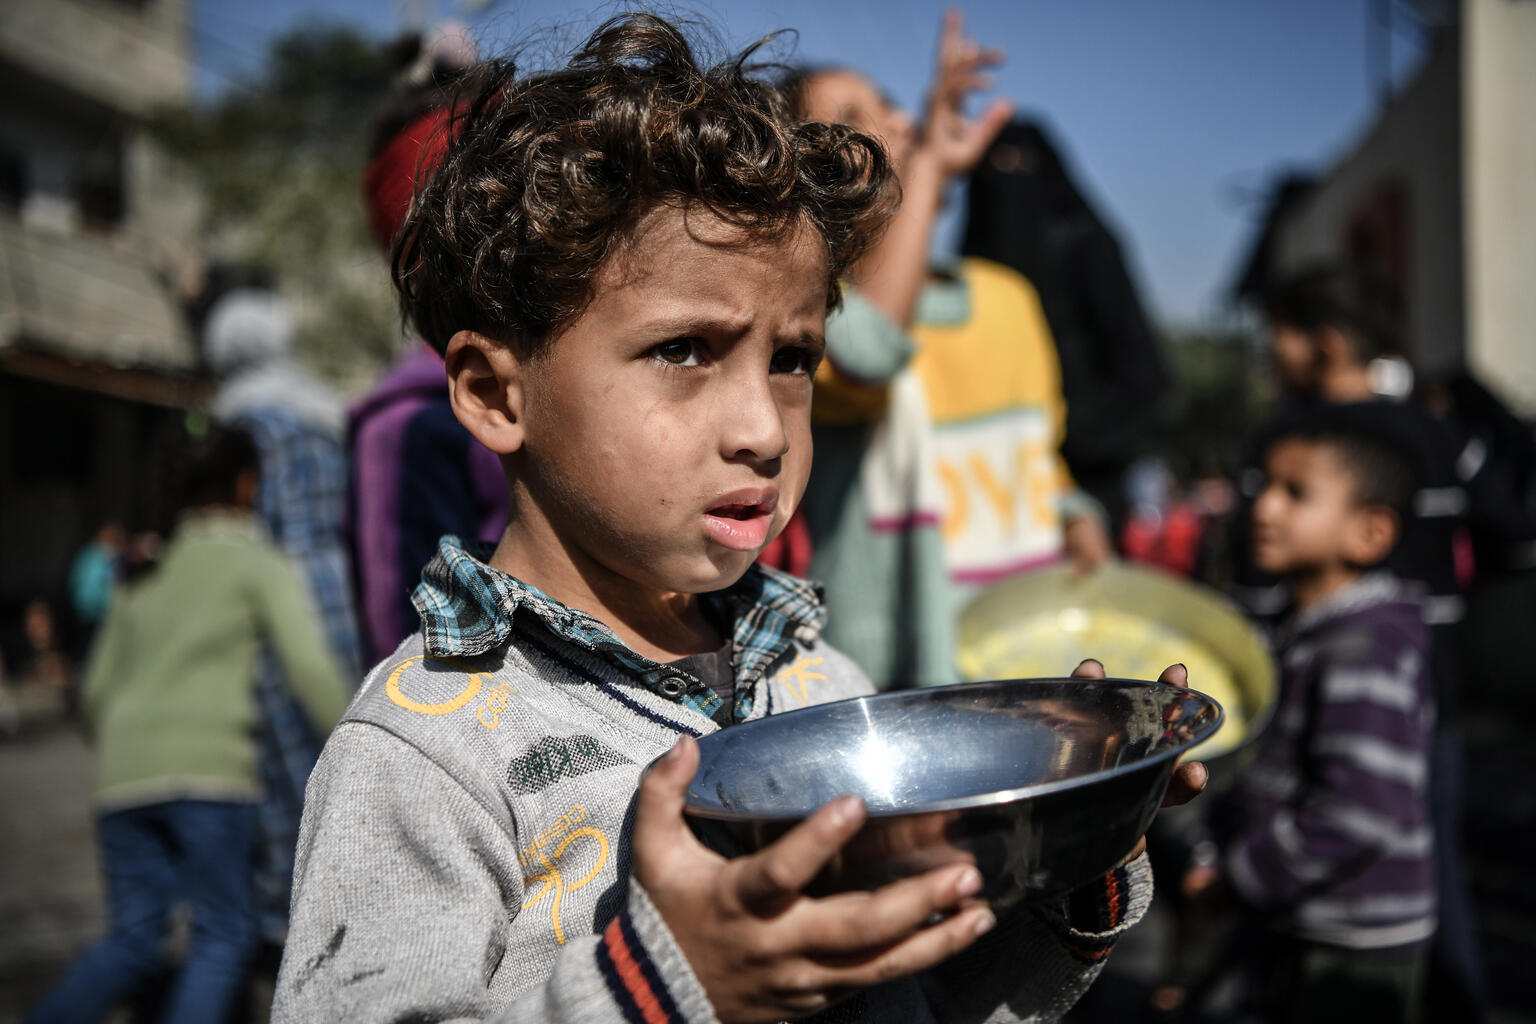 Ahmad, 5-years-old, waits his turn in the crowd to get a meal from a charitable hospice that distributes free food in the city of Rafah, southern the Gaza Strip. Source: Unicef - Abed Zagout